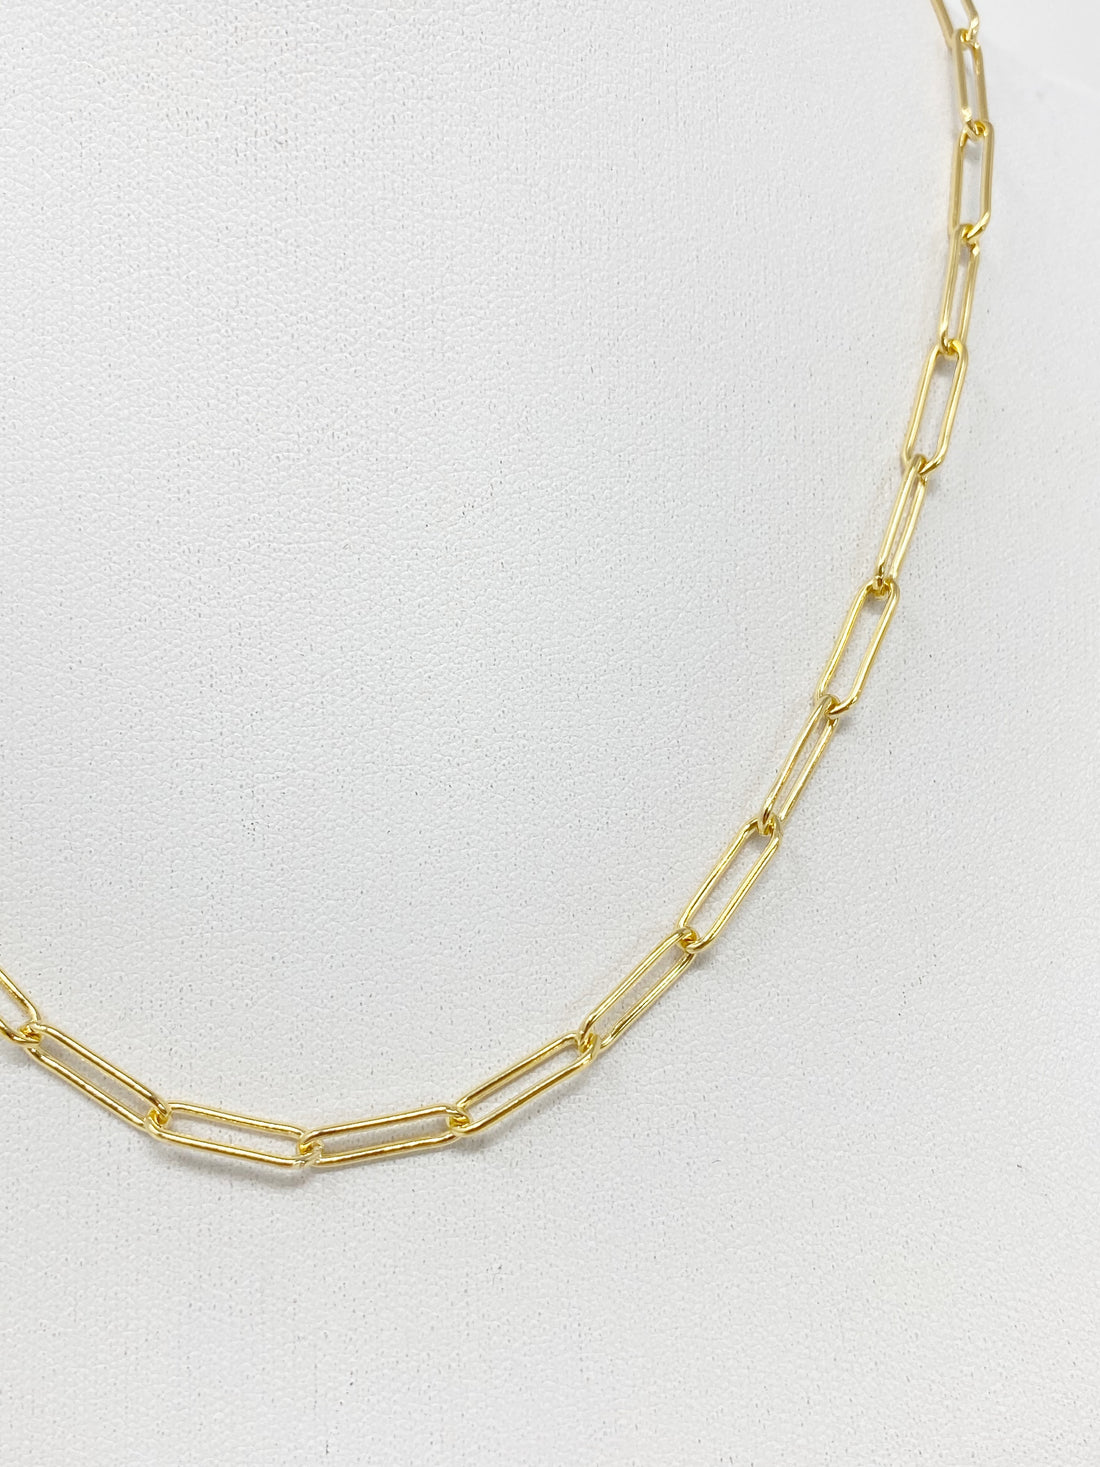 Anne Chainlink Necklace in 14K Gold Fill